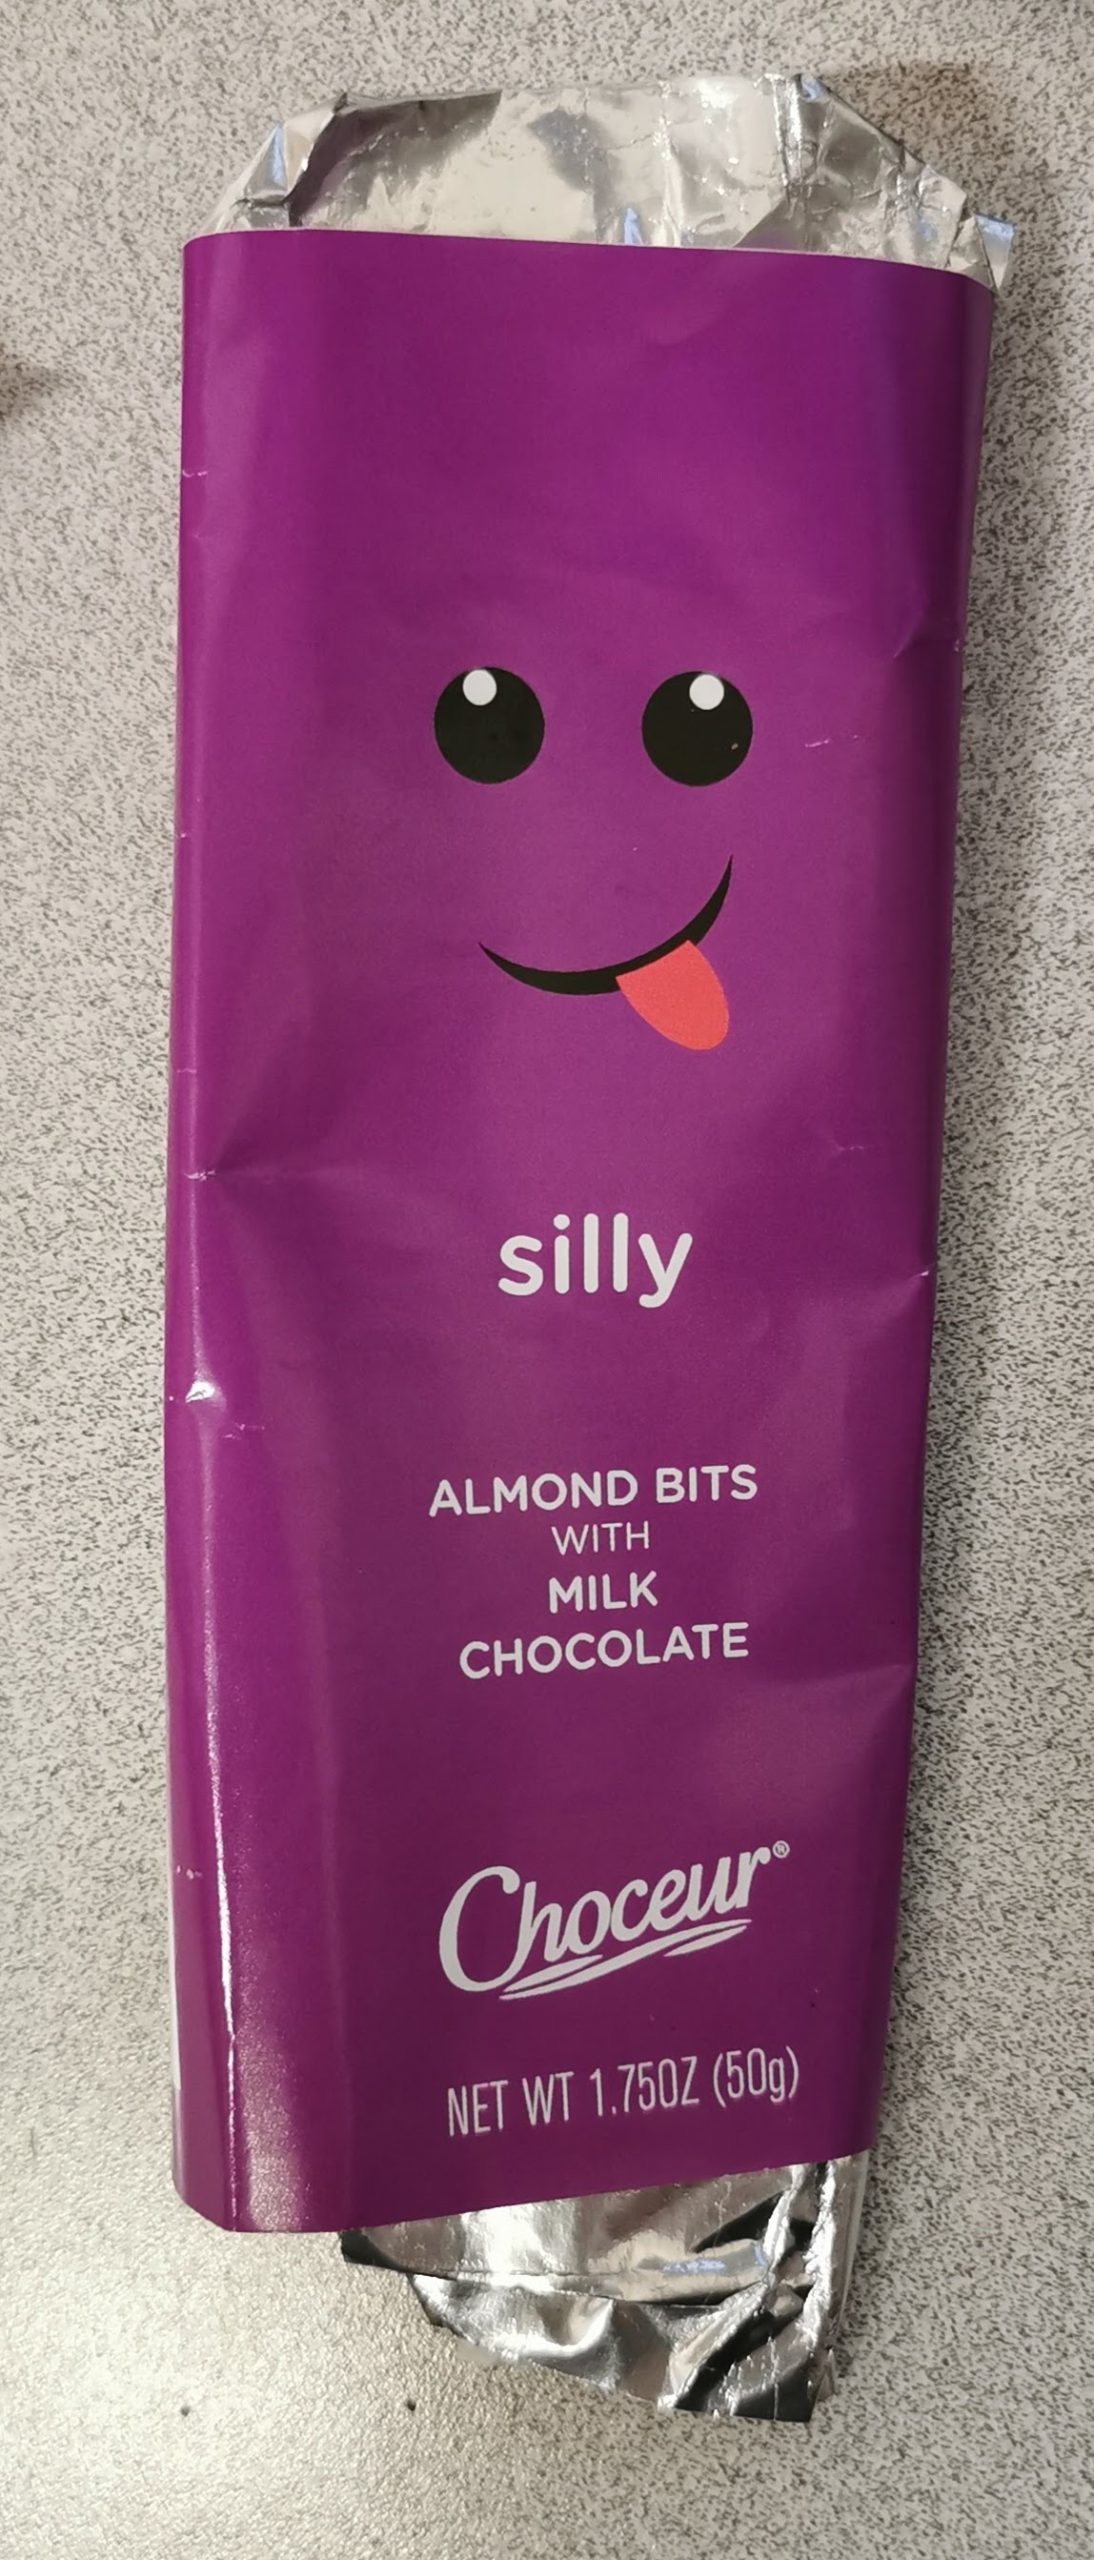 Read more about the article Choceur “Silly” Almond Bits with Milk Chocolate Mood Bar (Aldi)